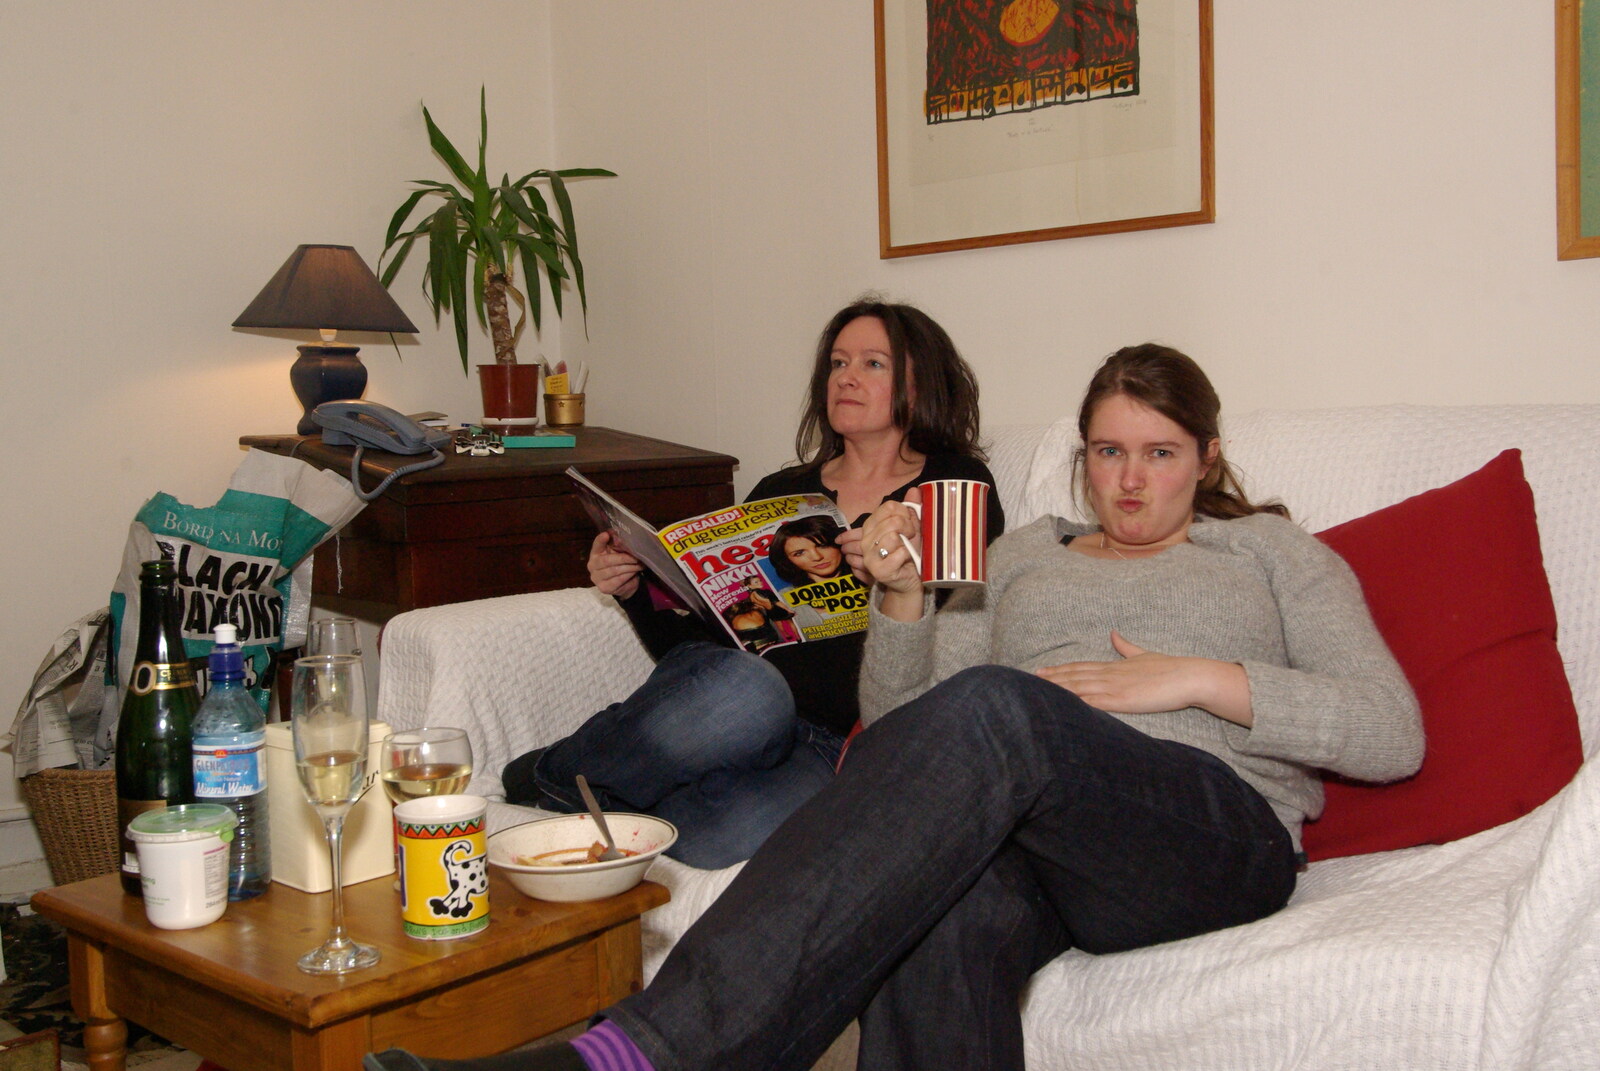 Easter in Dublin, Ireland - 21st March 2008: Evelyn reads a trashy magazine as Isobel has tea